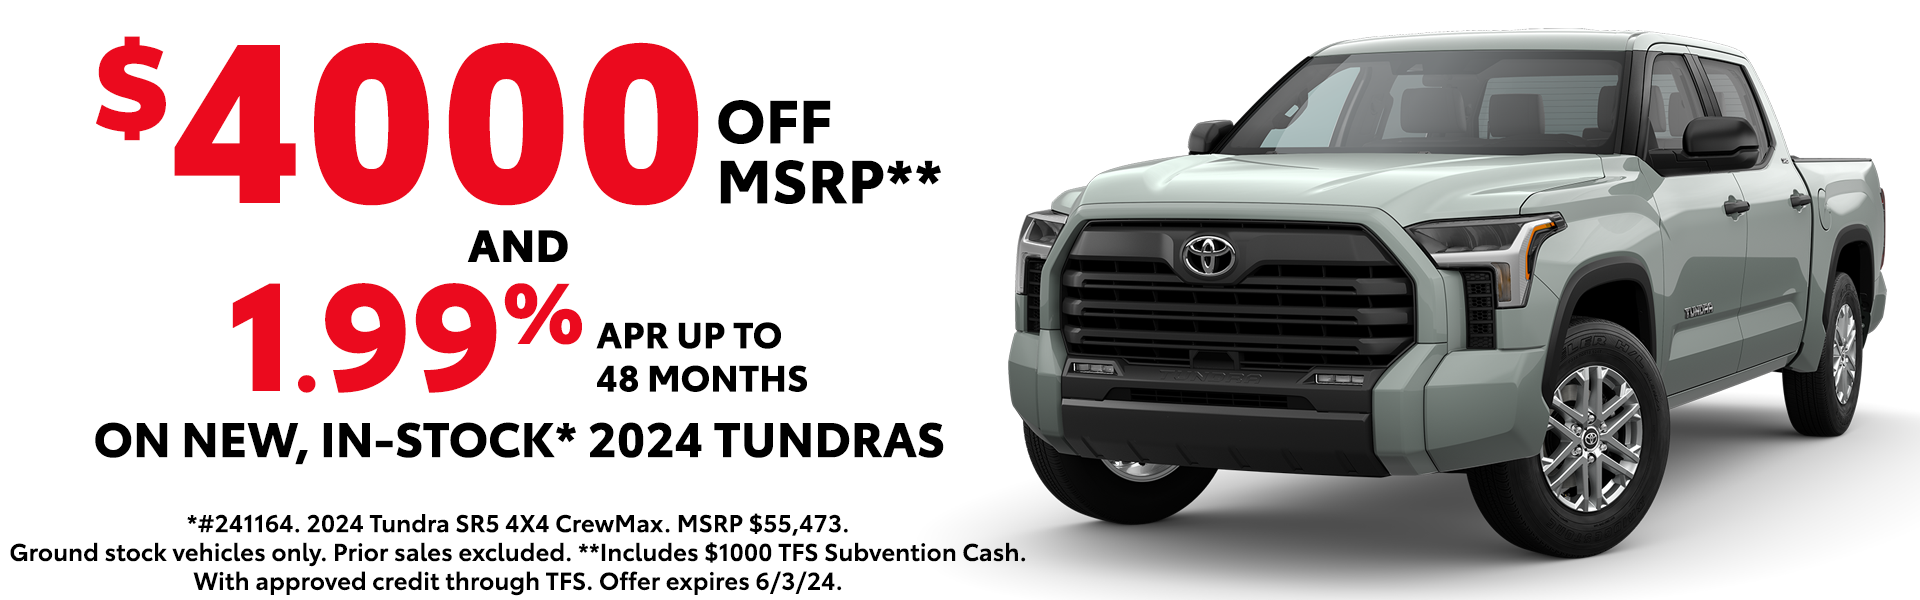 1.99% APR for 48 Months on New Tundras